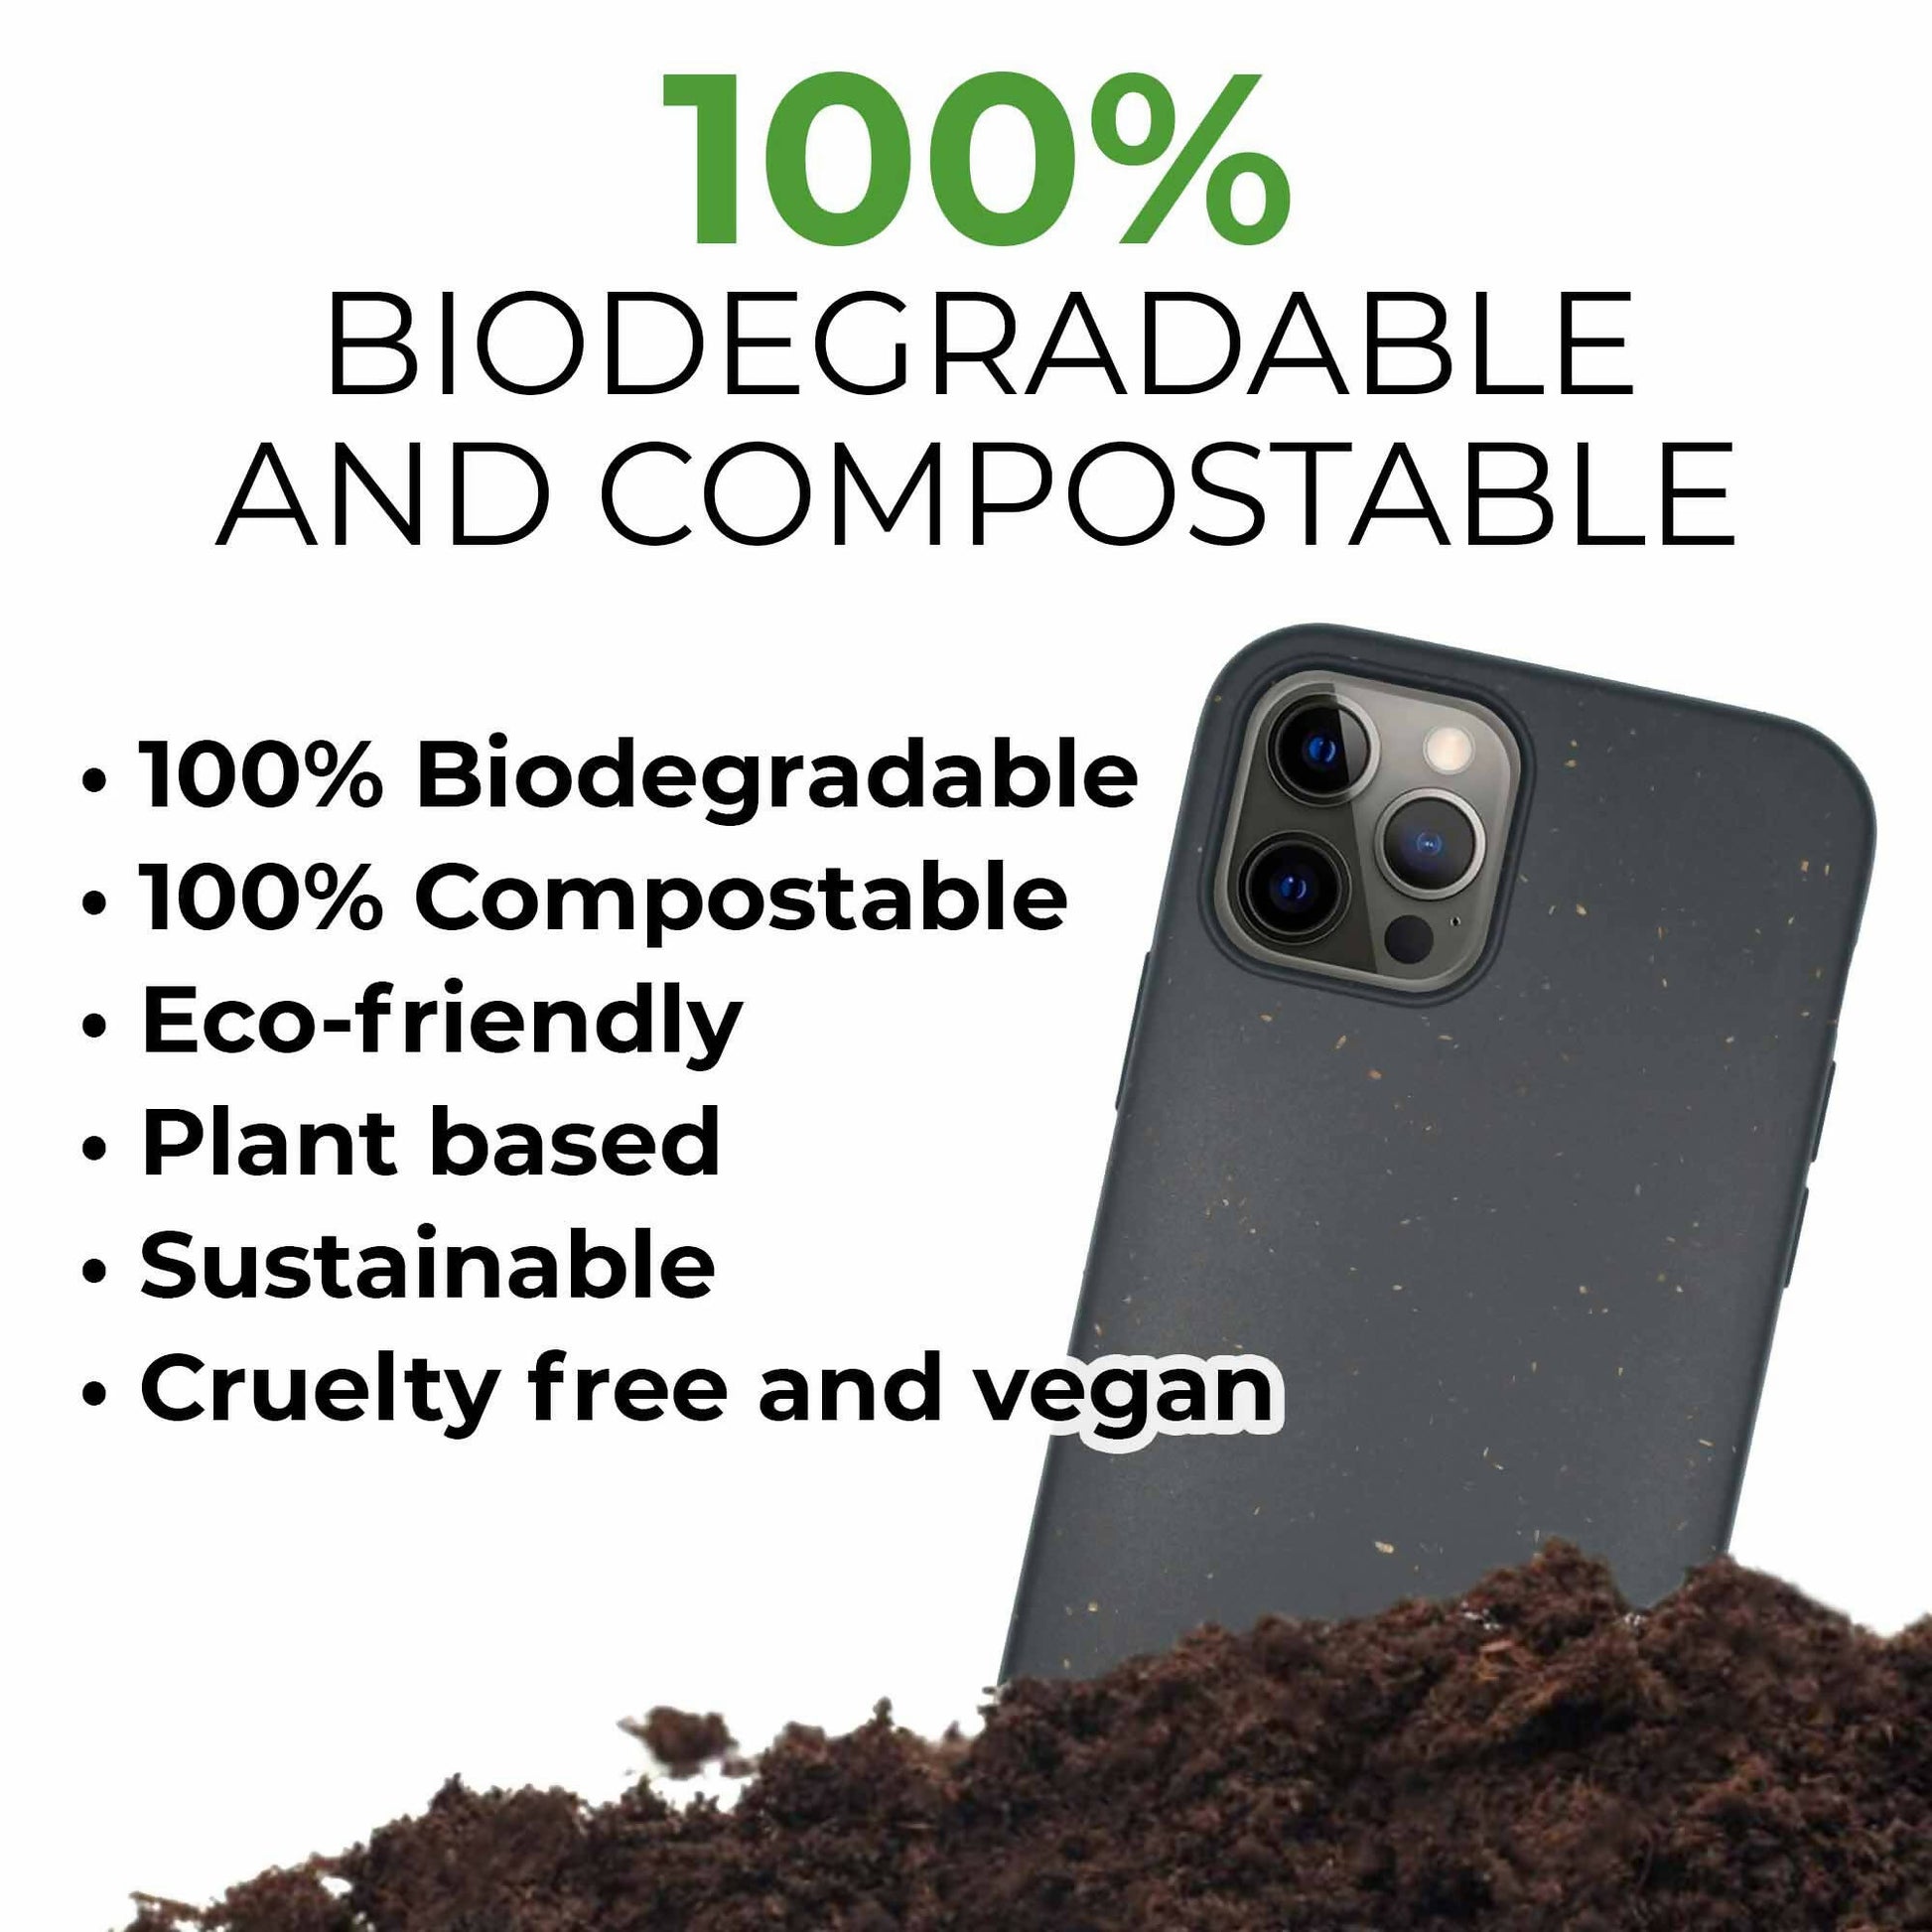 SEE, the eco friendly phone case, keeps your phone the focus